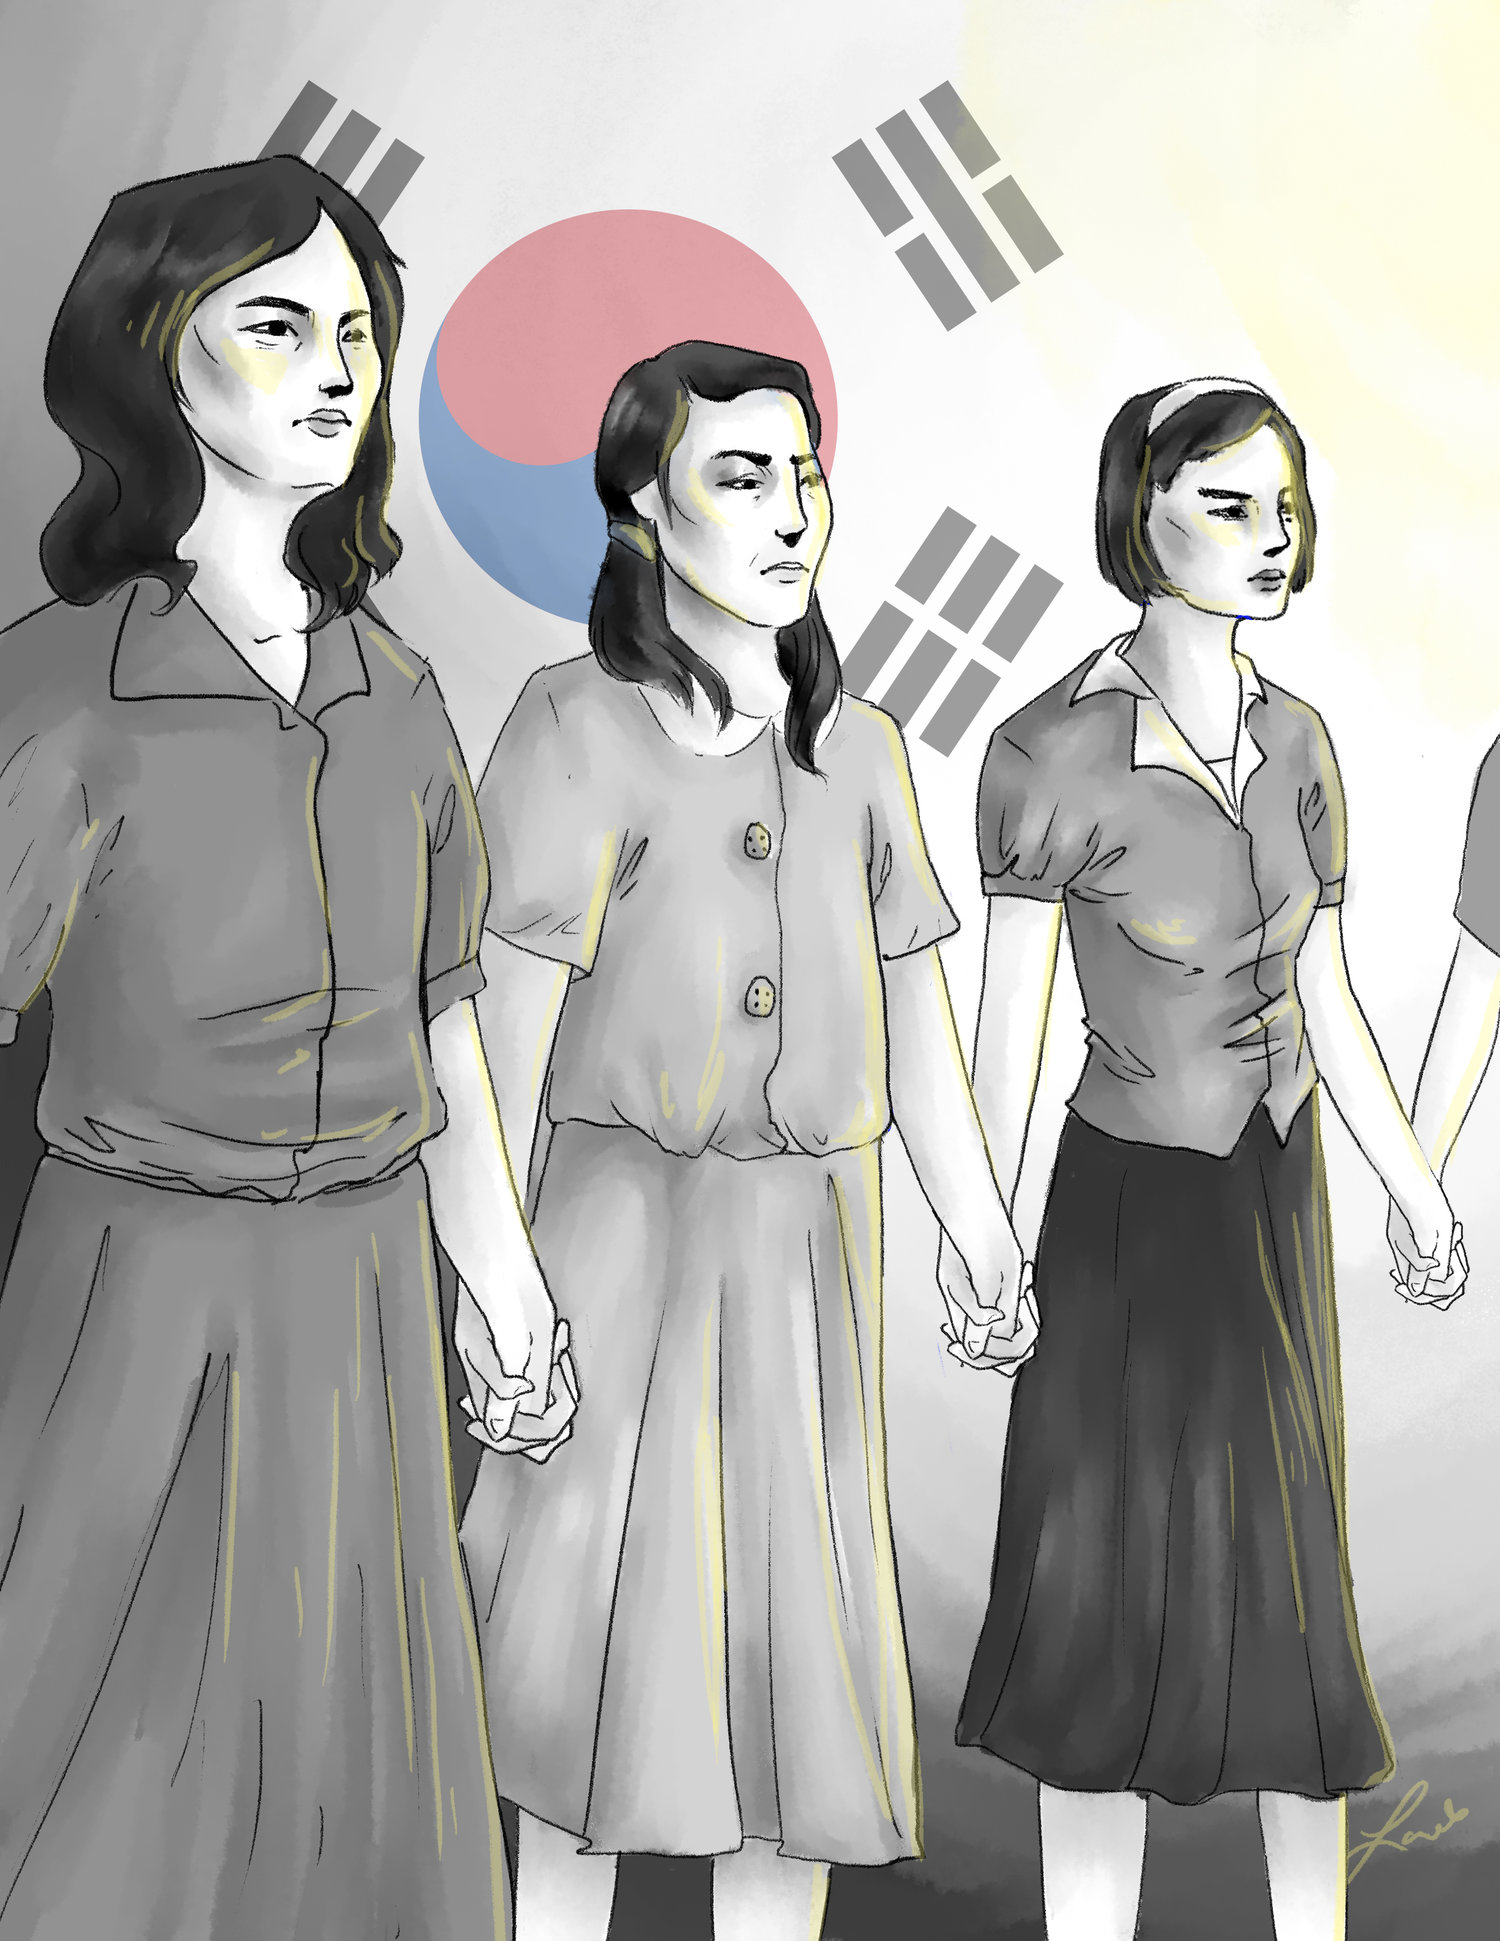 Apology Politics Japan And South Koreas Dispute Over Comfort Women — The Cornell Diplomat